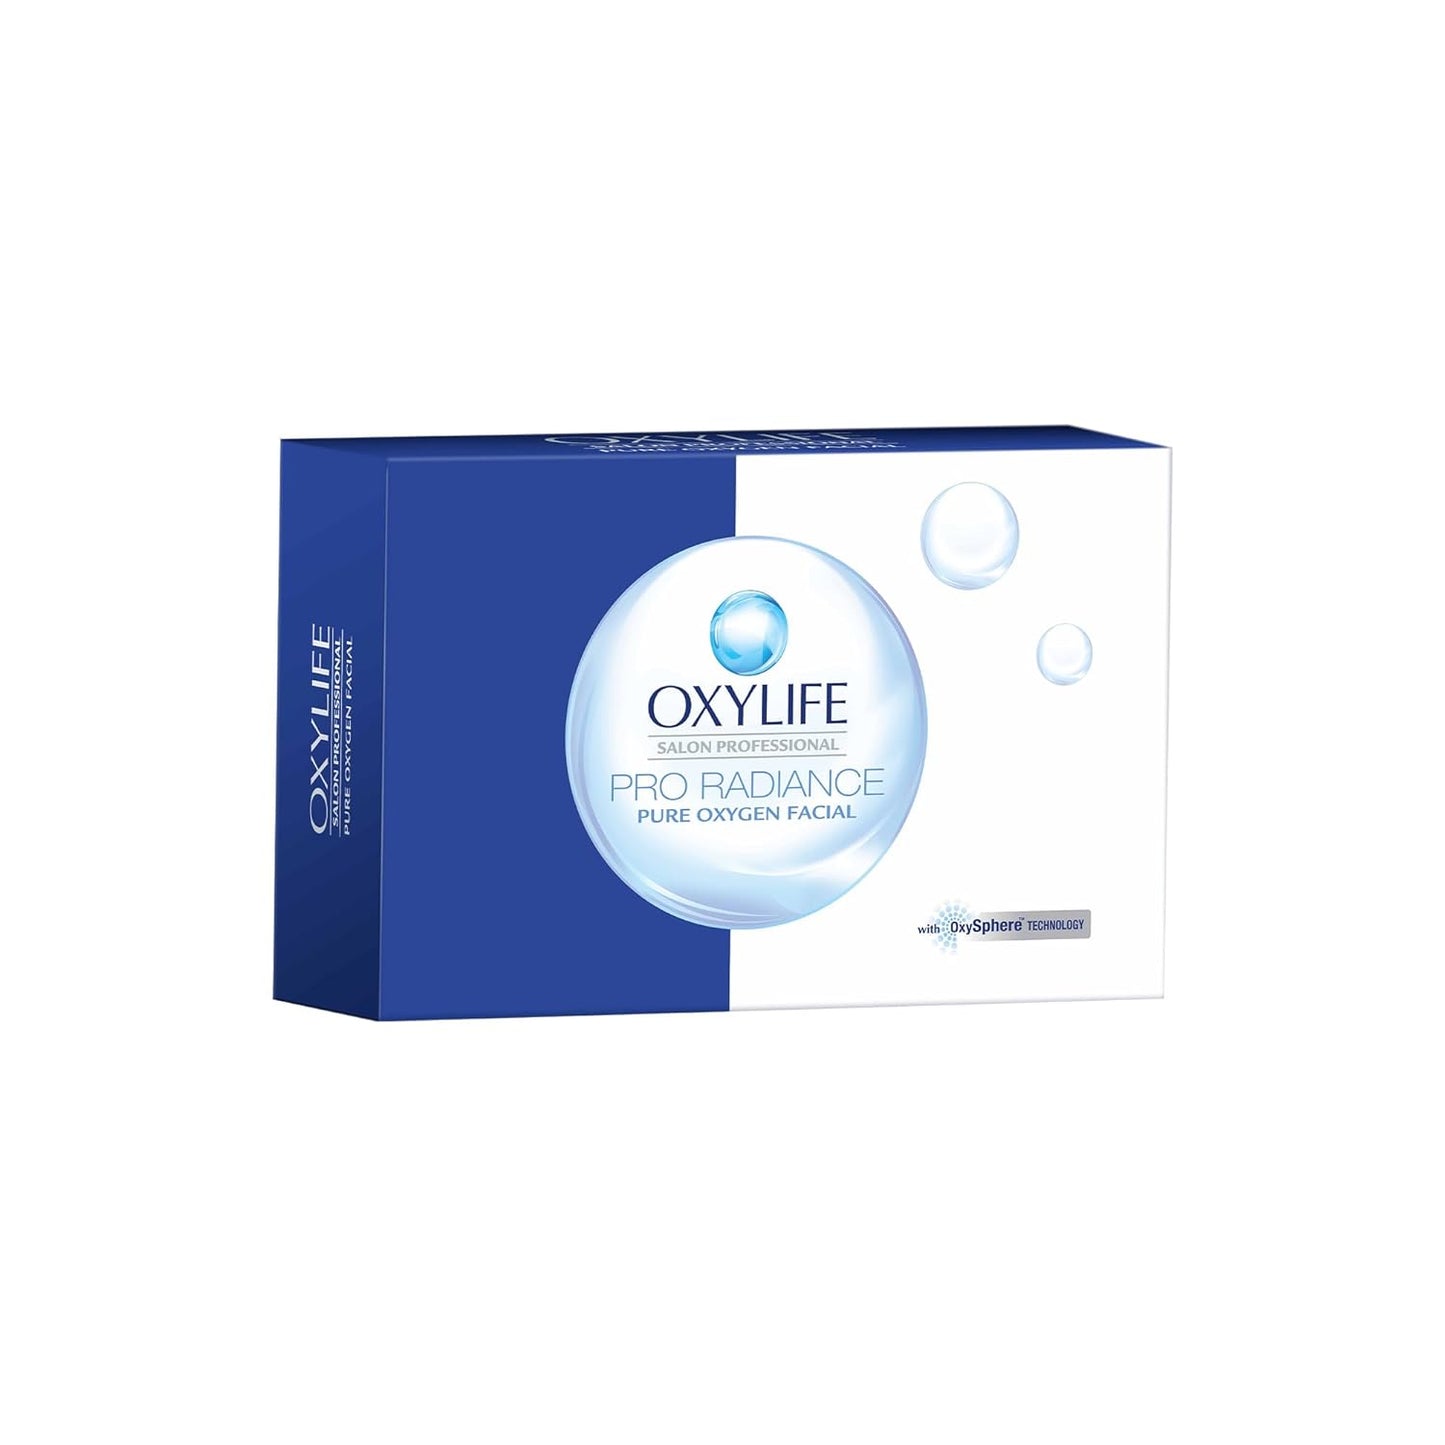 Oxylife Salon Professional Proradiance Pure Oxygen Facial Kit - 50g